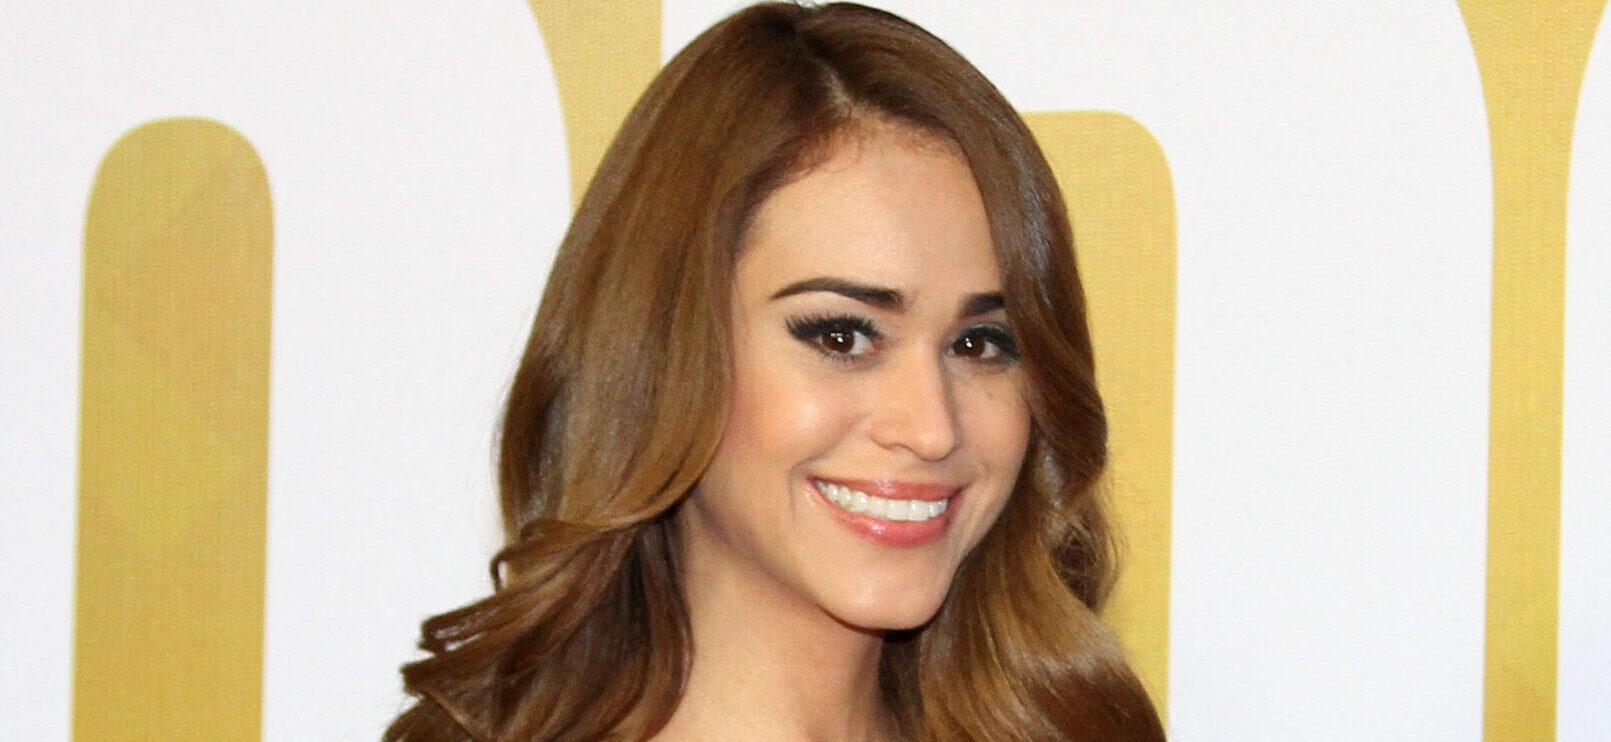 Mexican Weather Girl Yanet Garcia In Lingerie Shares ‘Health Benefits’